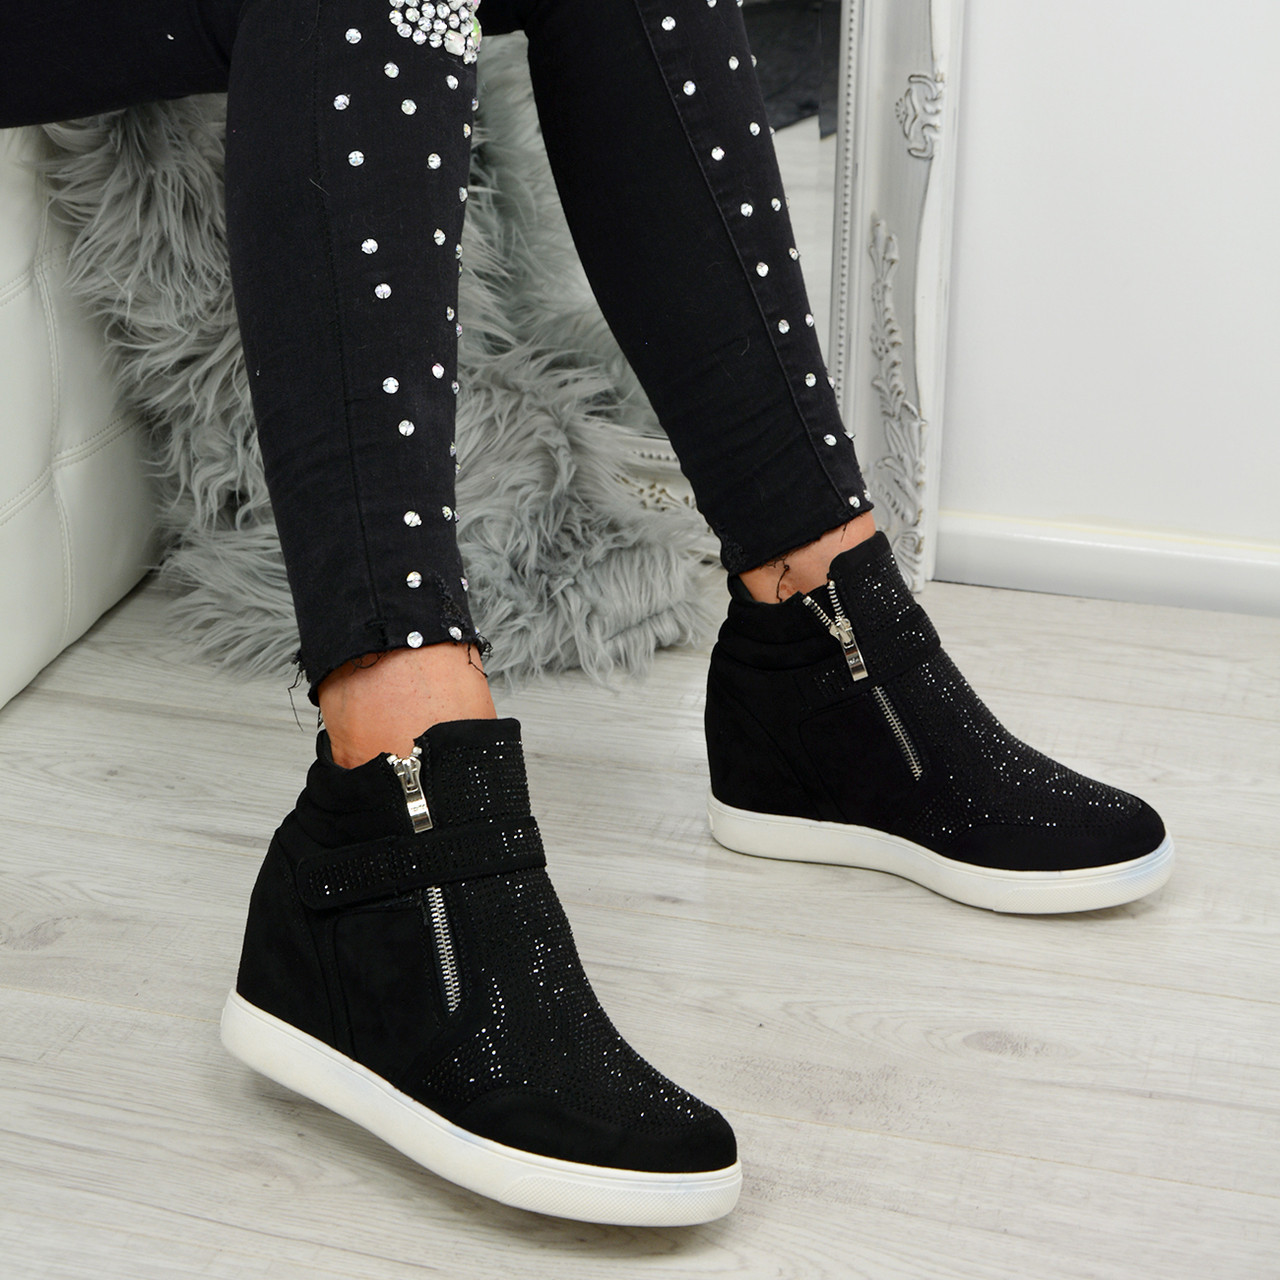 black wedge trainer boots